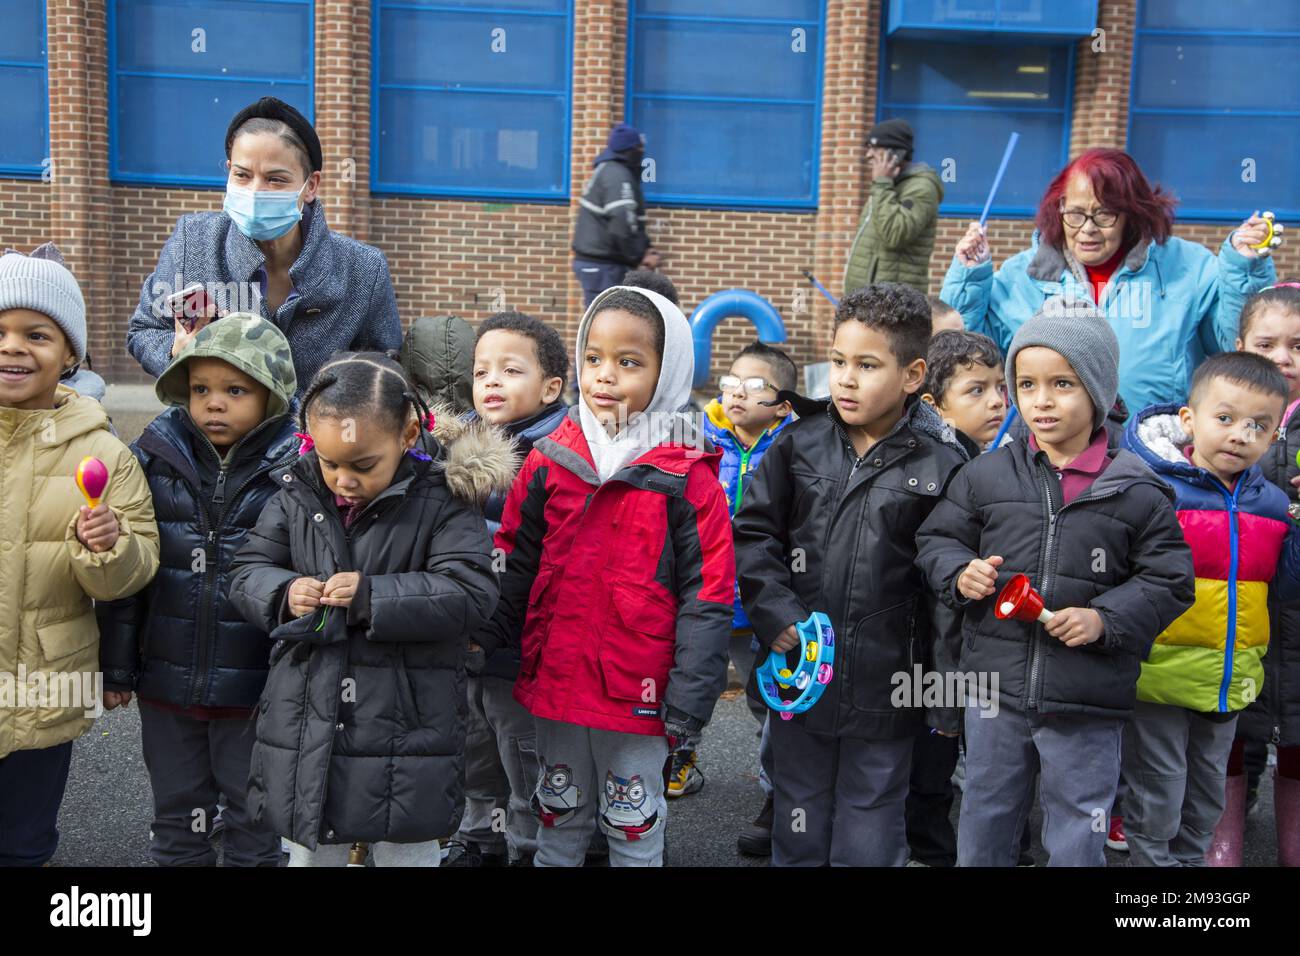 Local school children watch the  2023 Three Kings Day Parade along 3rd Avenue in Spanish Harlem, hosted by El Museo del Barrio, New York’s leading Latino cultural institution. One of the El Museo del Barrio large artistic puppets that lead the parade each year. Stock Photo